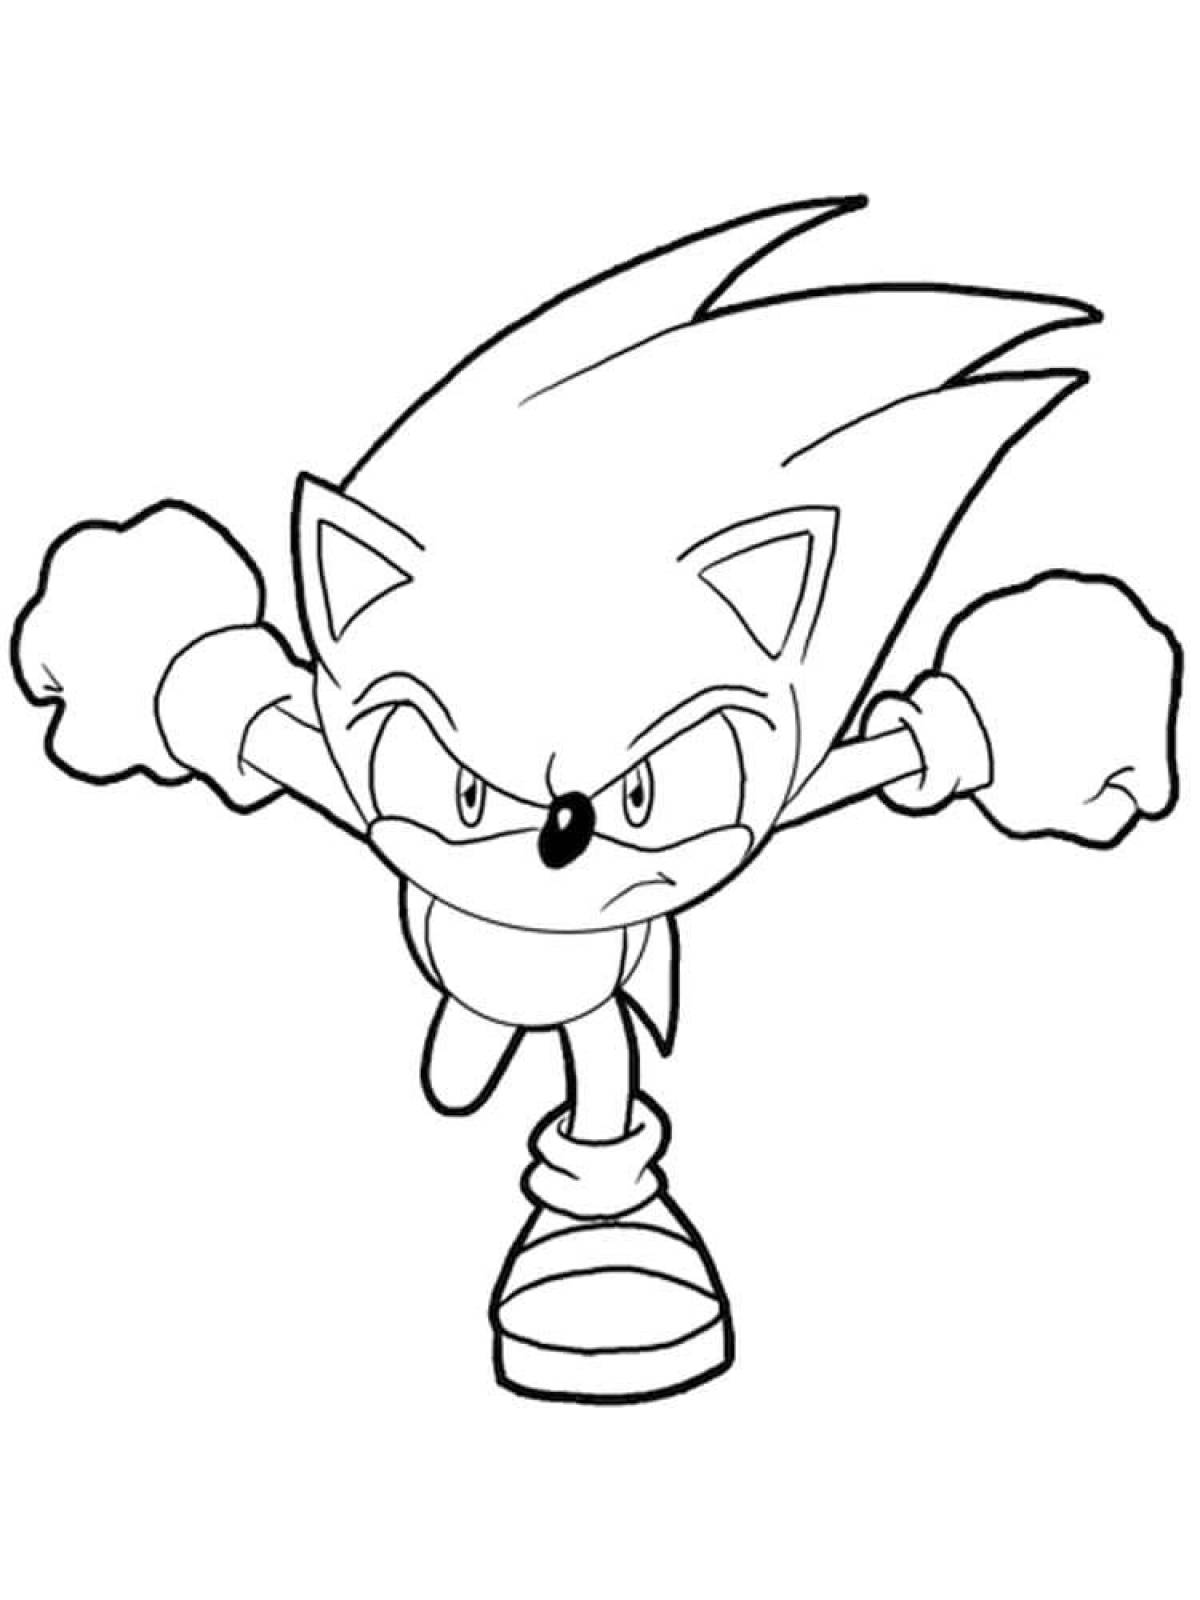 Animated sonic coloring page